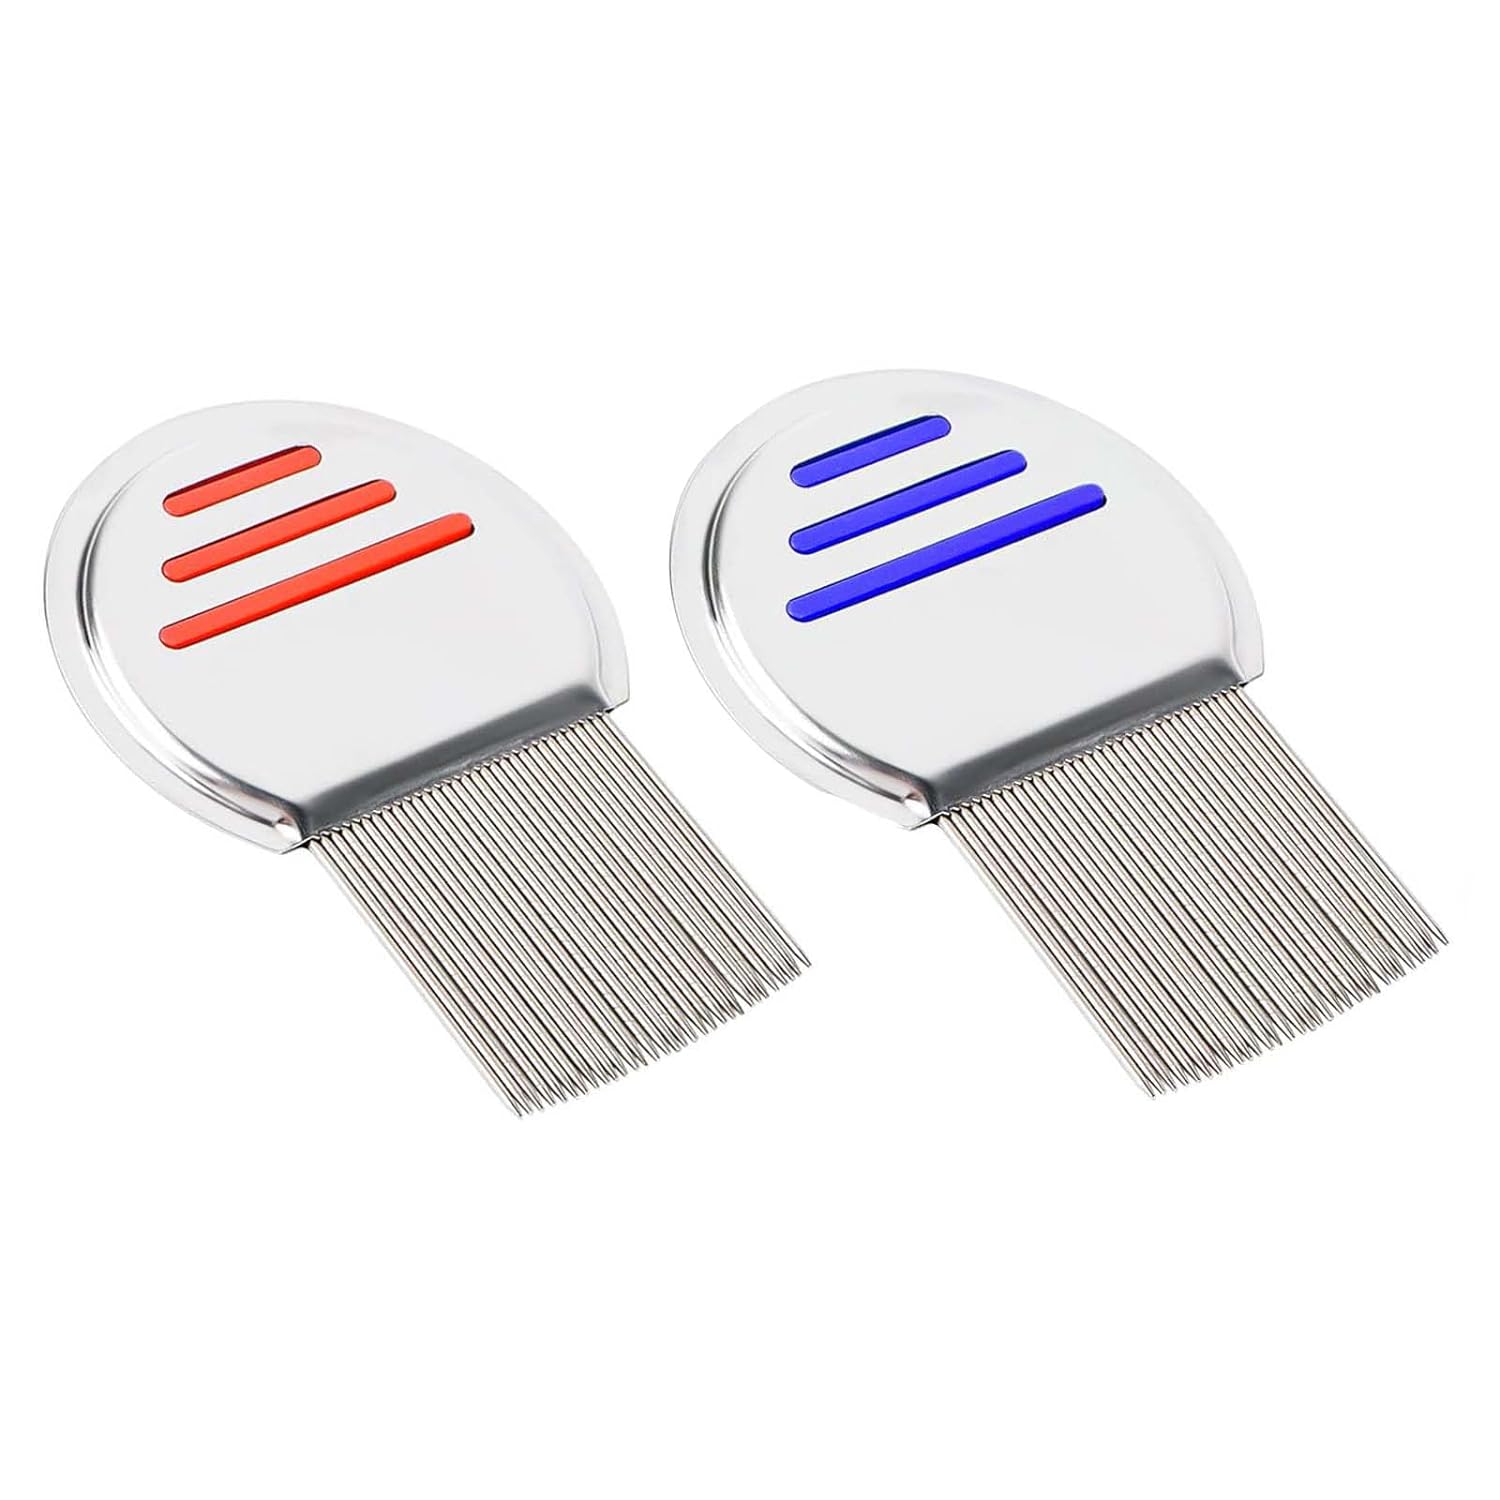 Pack of 2 Lice Comb, Nit Comb with Extra Tight Standing Tines, Extra Fine Lice Comb, for Removing Lice Cracks and Dandruff for All Hair Types, Head Lice Treatment for Pets